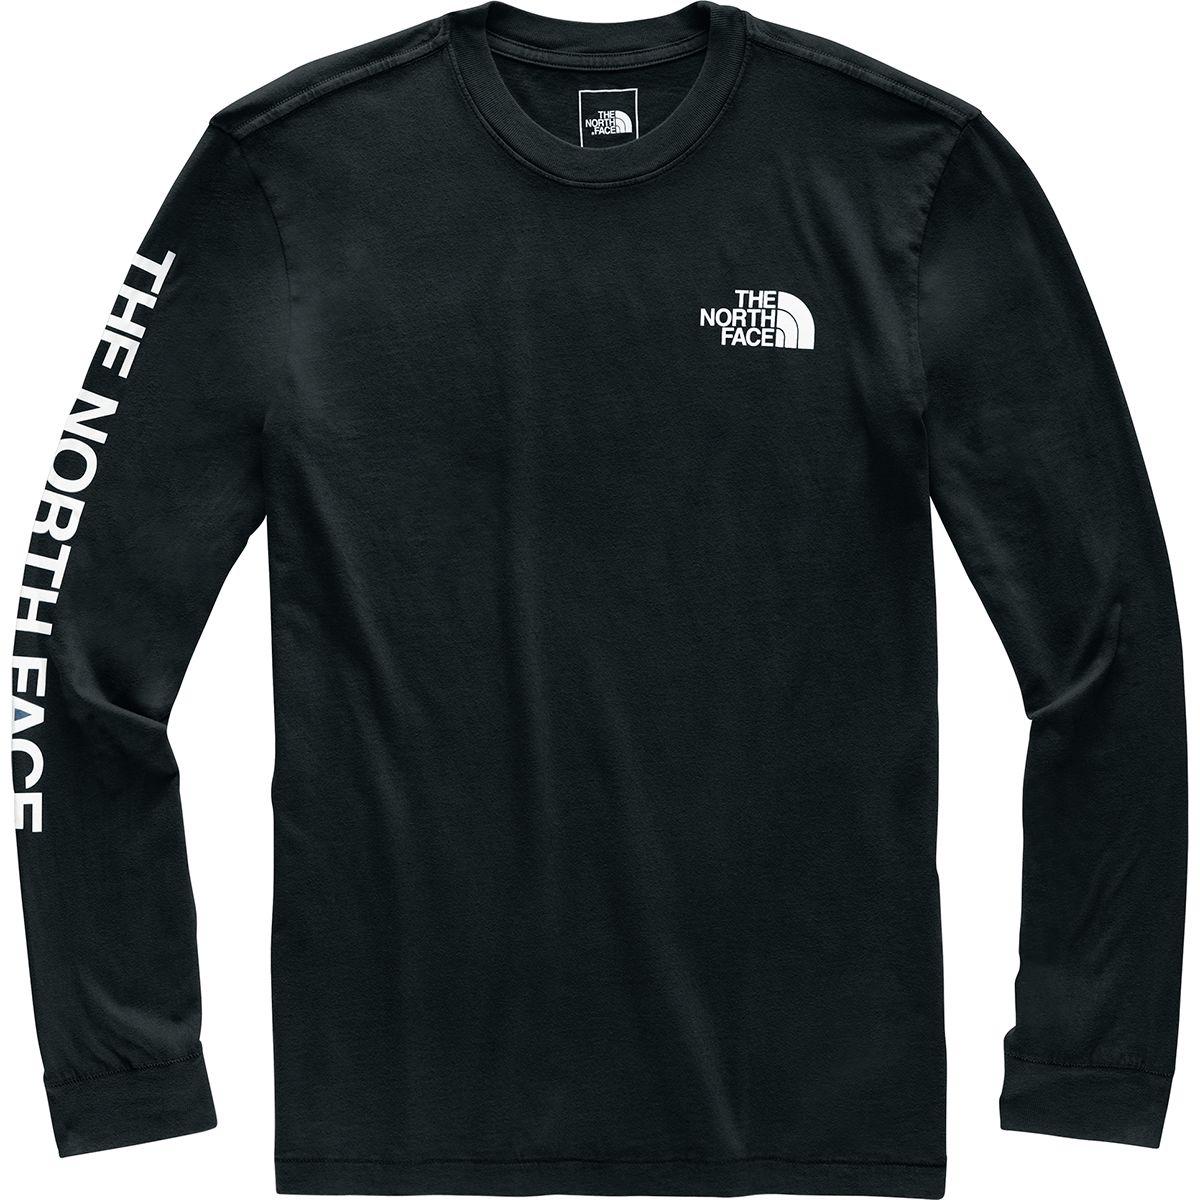 The North Face Sleeve Hit Long-sleeve T-shirt in Black for Men - Save 3 ...